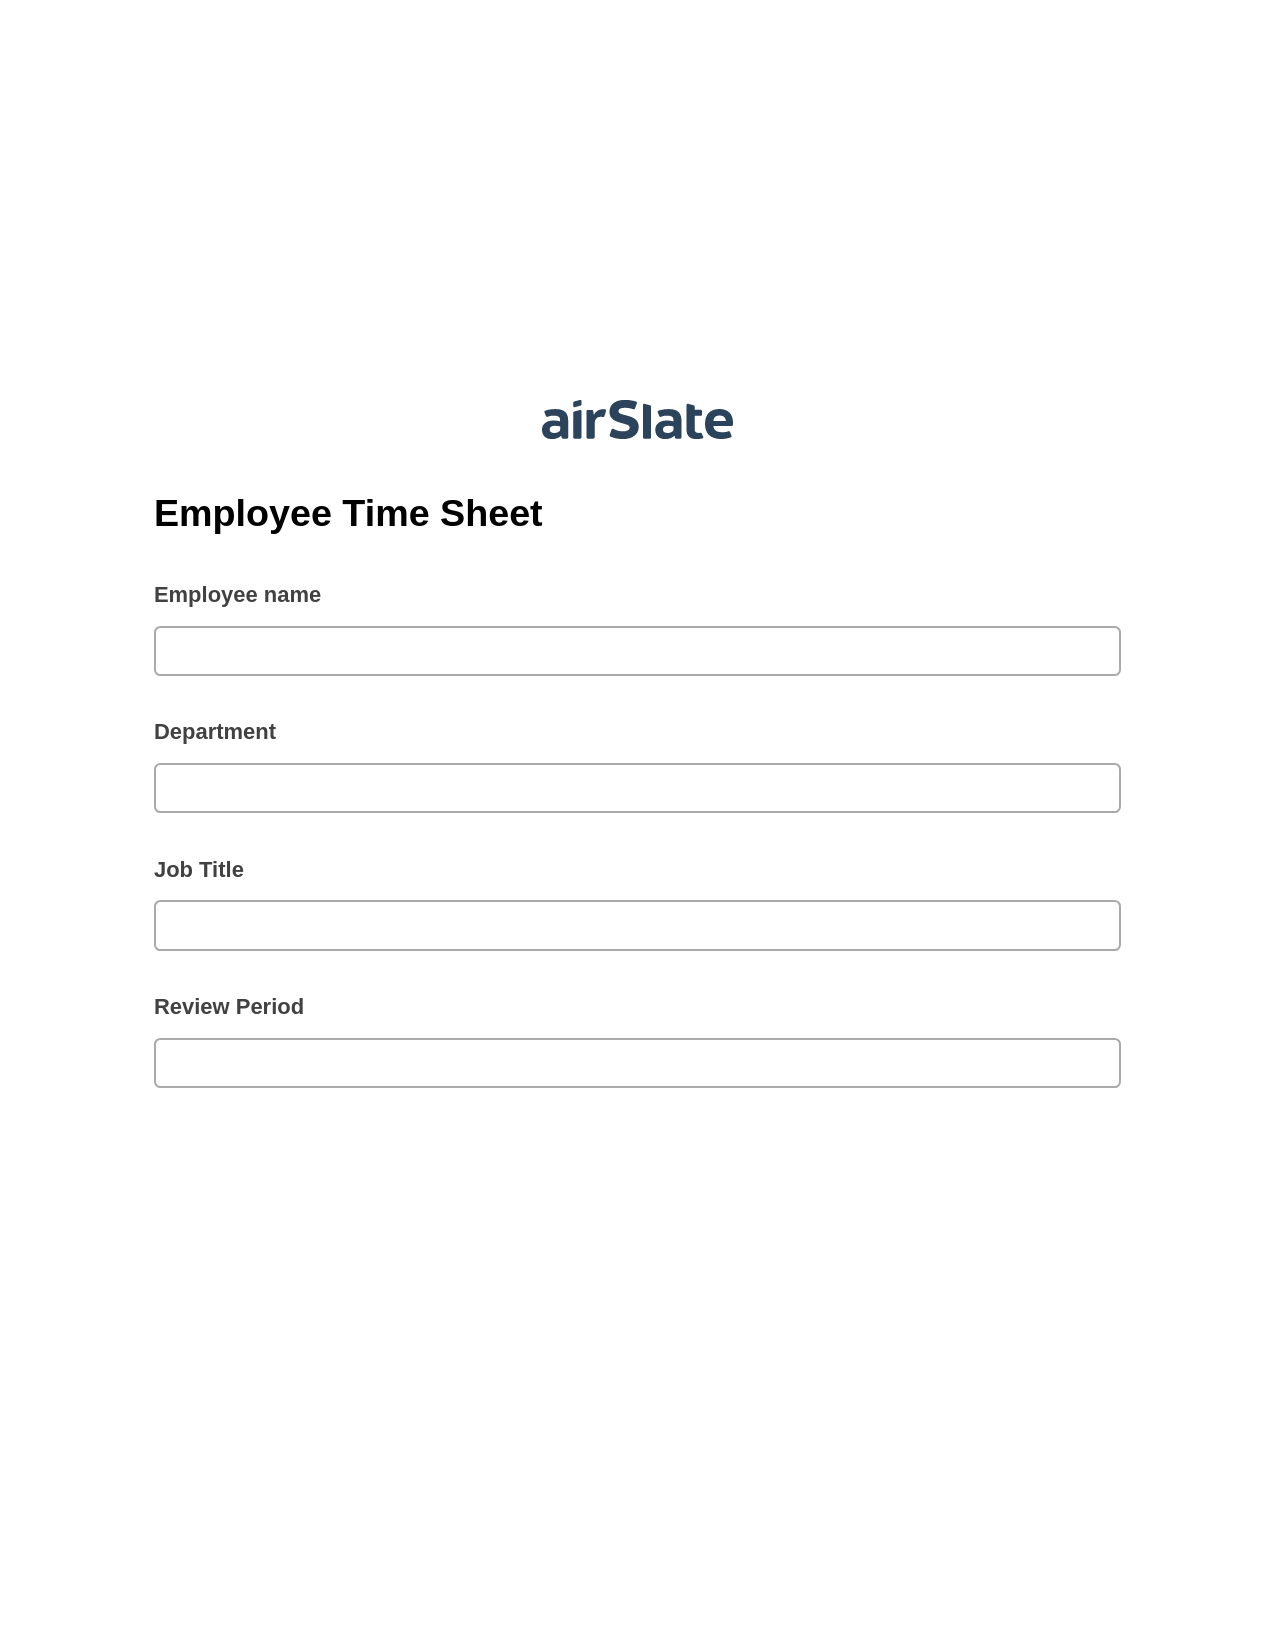 Multirole Employee Time Sheet Pre-fill from another Slate Bot, Update Audit Trail Bot, Archive to SharePoint Folder Bot